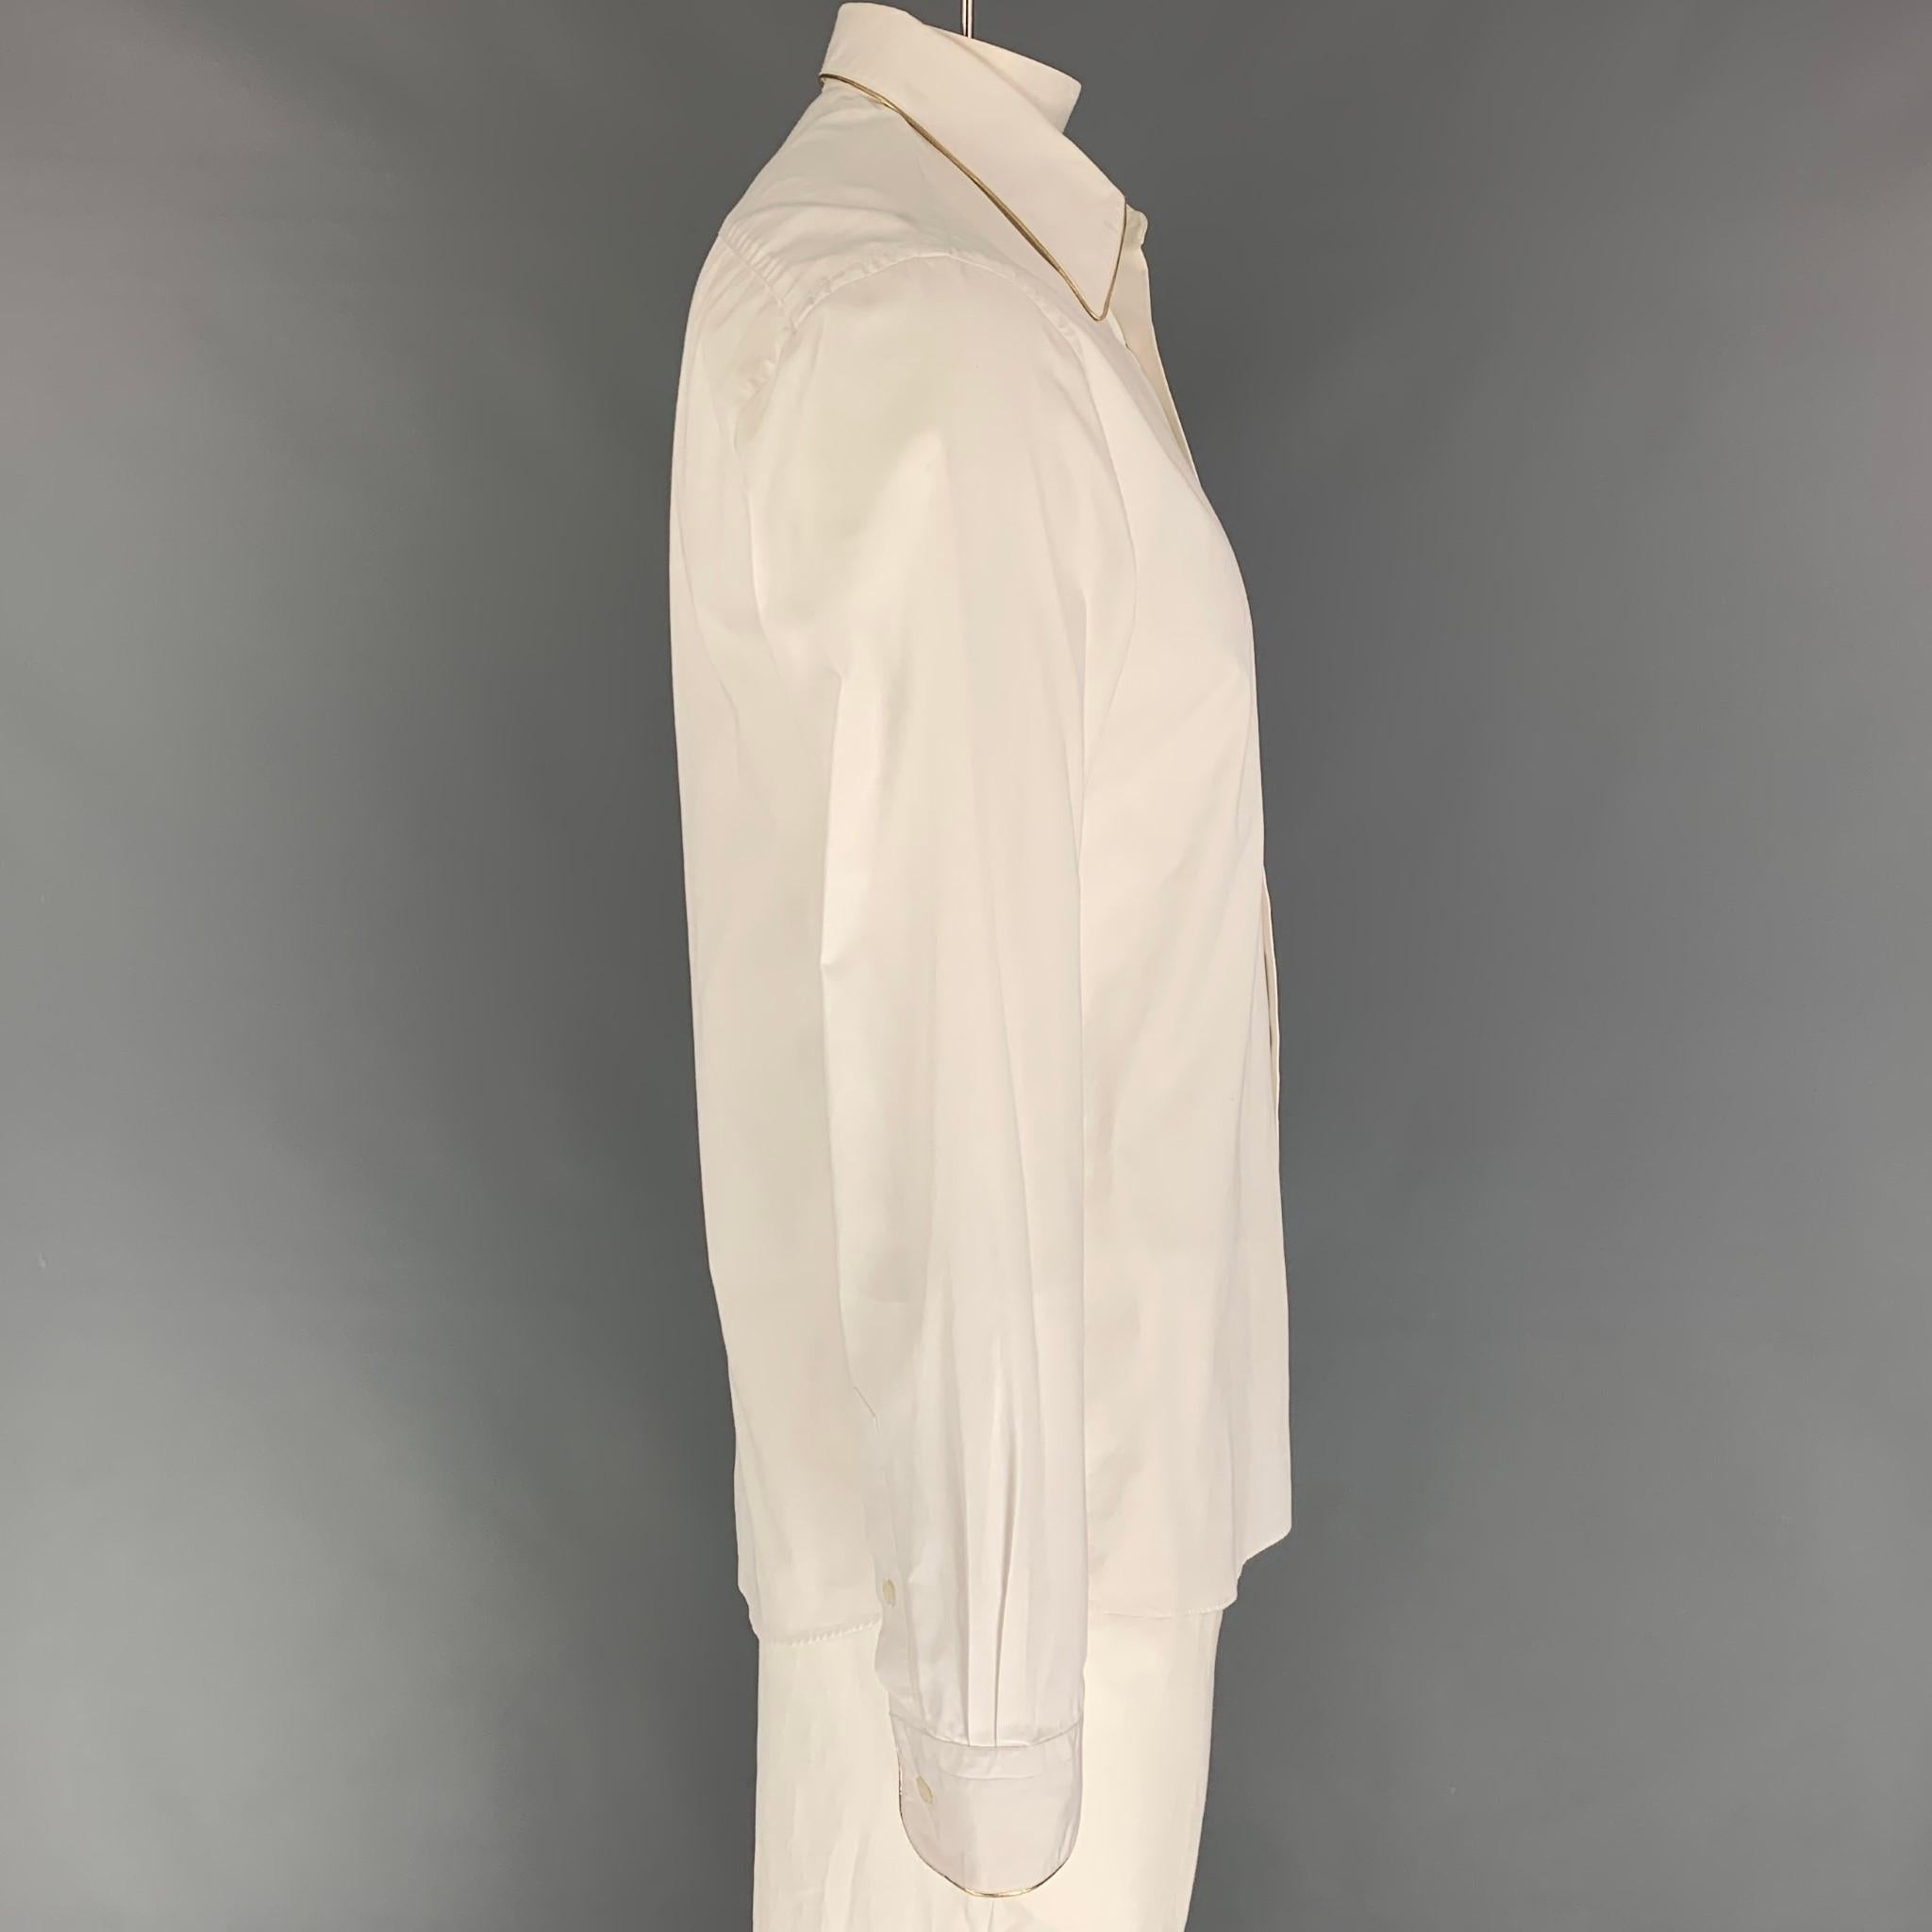 ALEXANDER McQUEEN long sleeve shirt comes in a white cotton with a gold trim featuring a spread collar and a button up closure. Made in Romania. 

Good Pre-Owned Condition. Minor discoloration at neckline and under arms.
Marked: